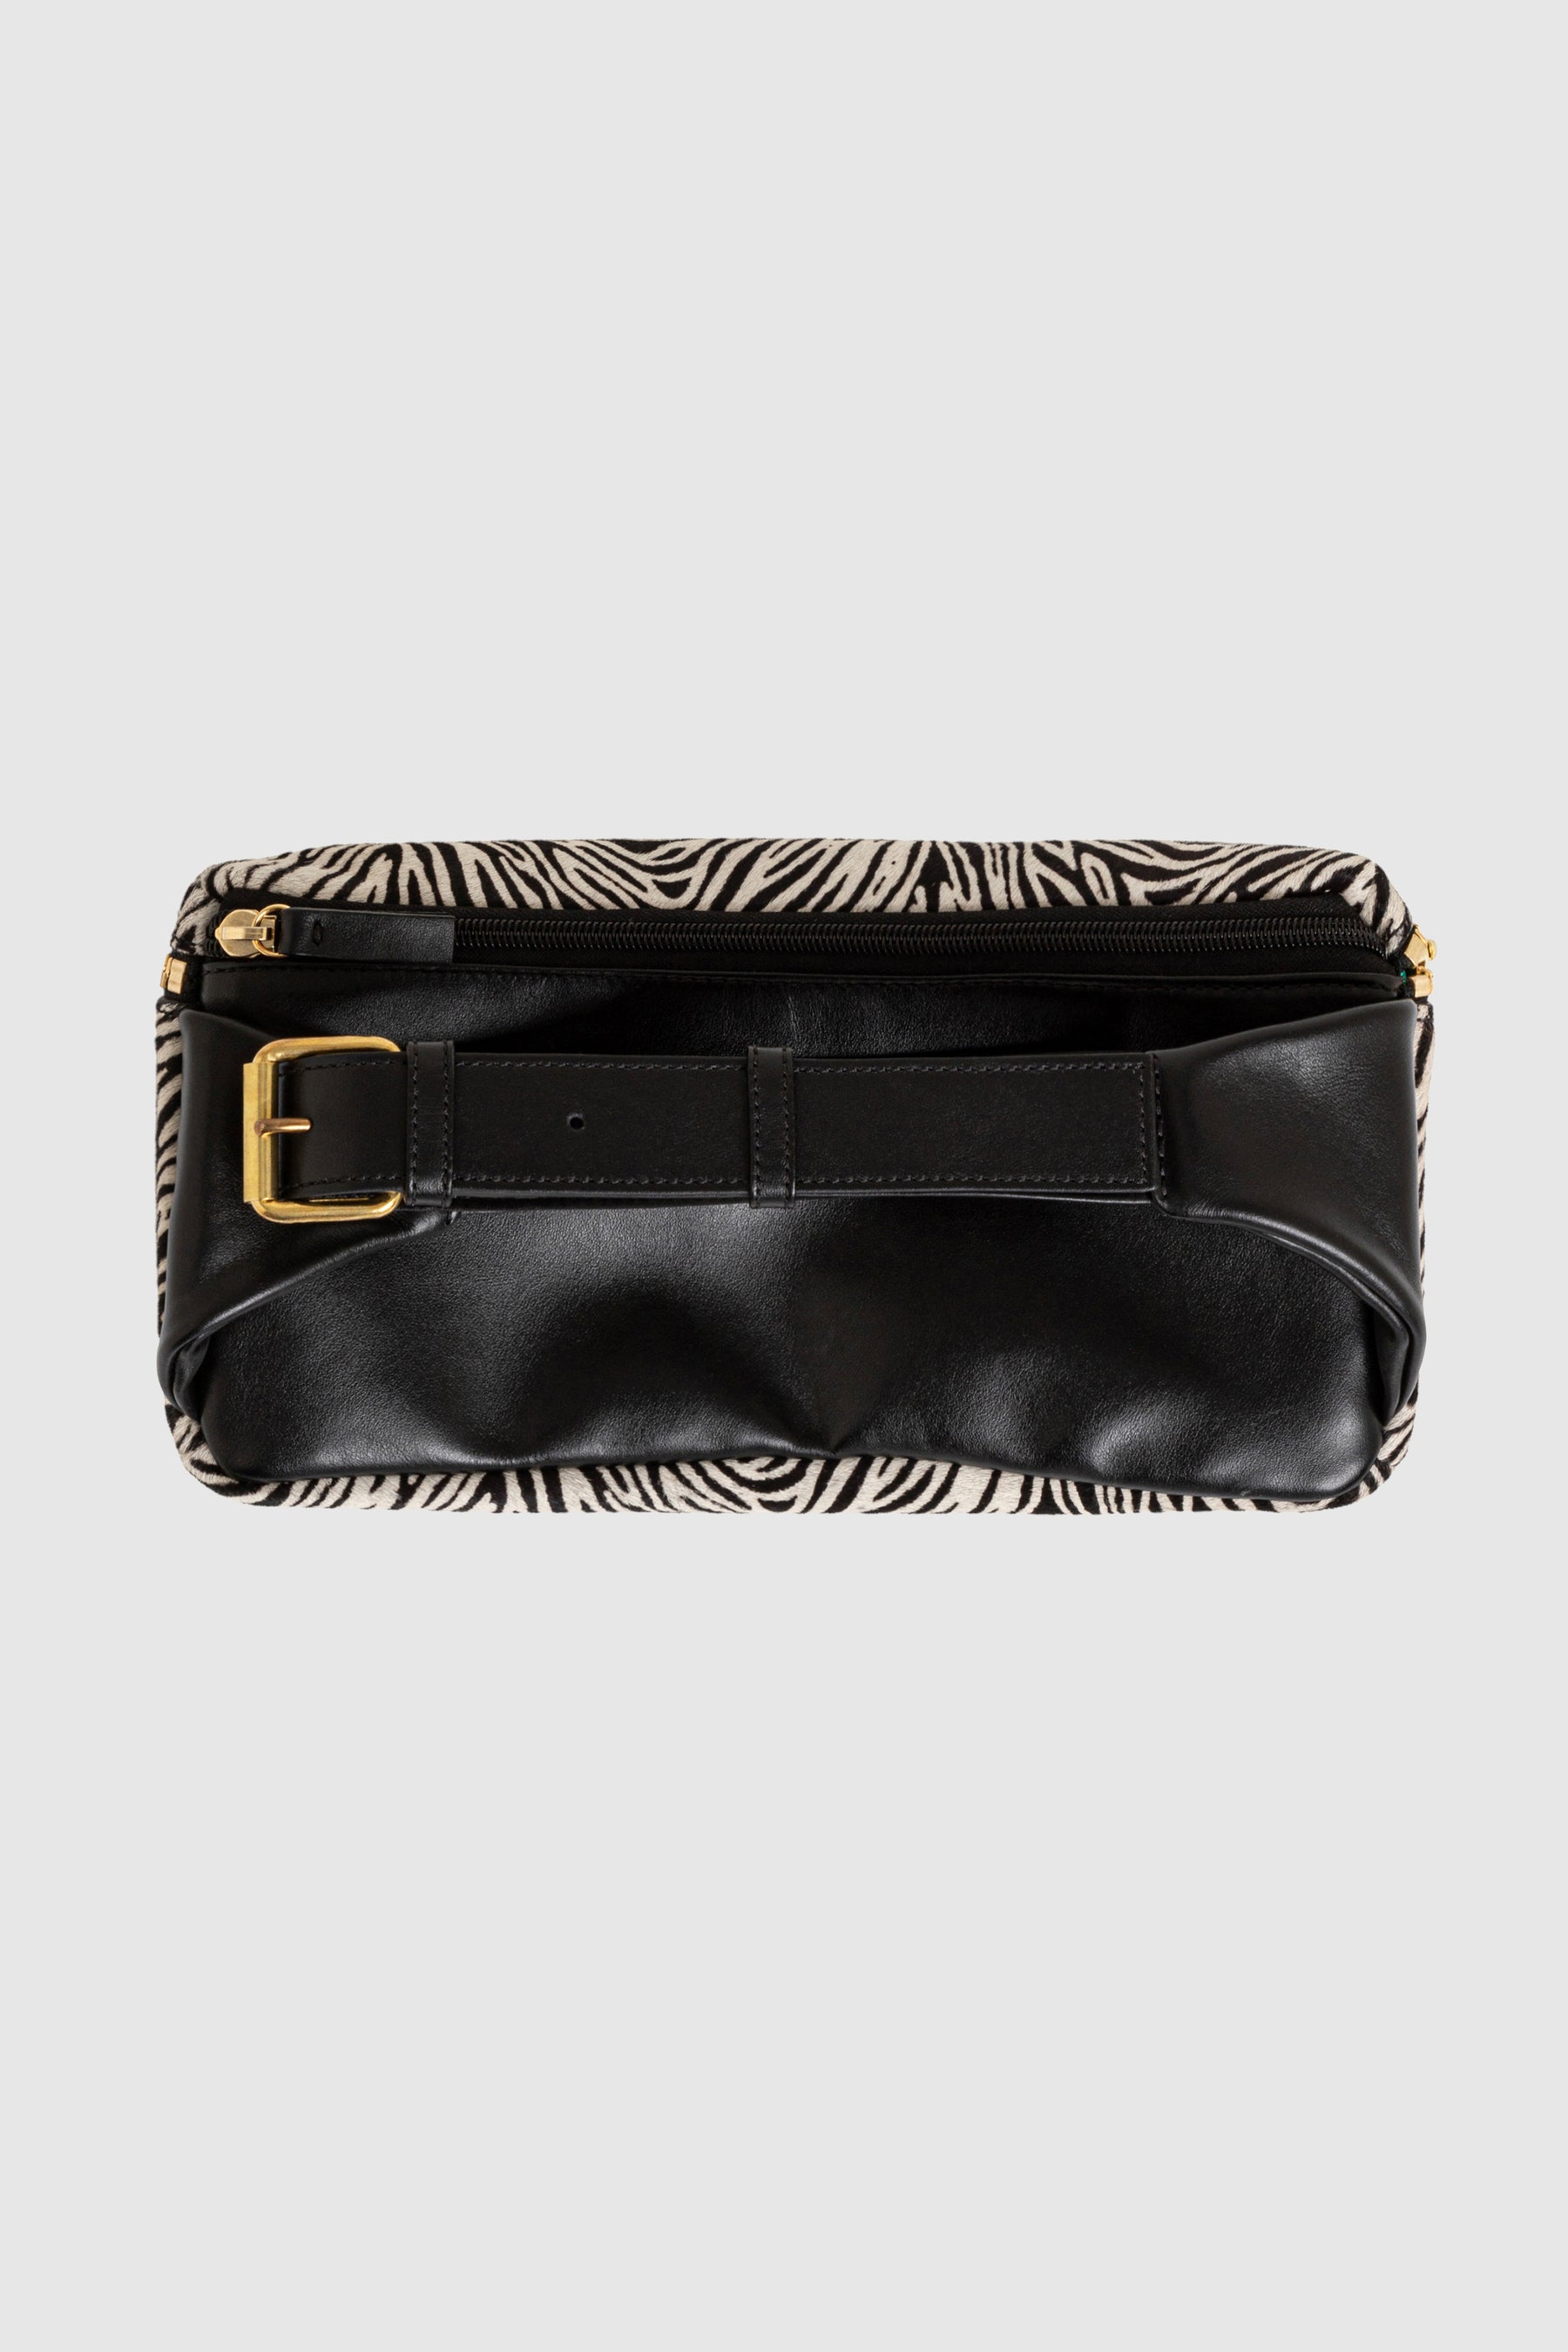 Fanny pack in Zebra printed leather